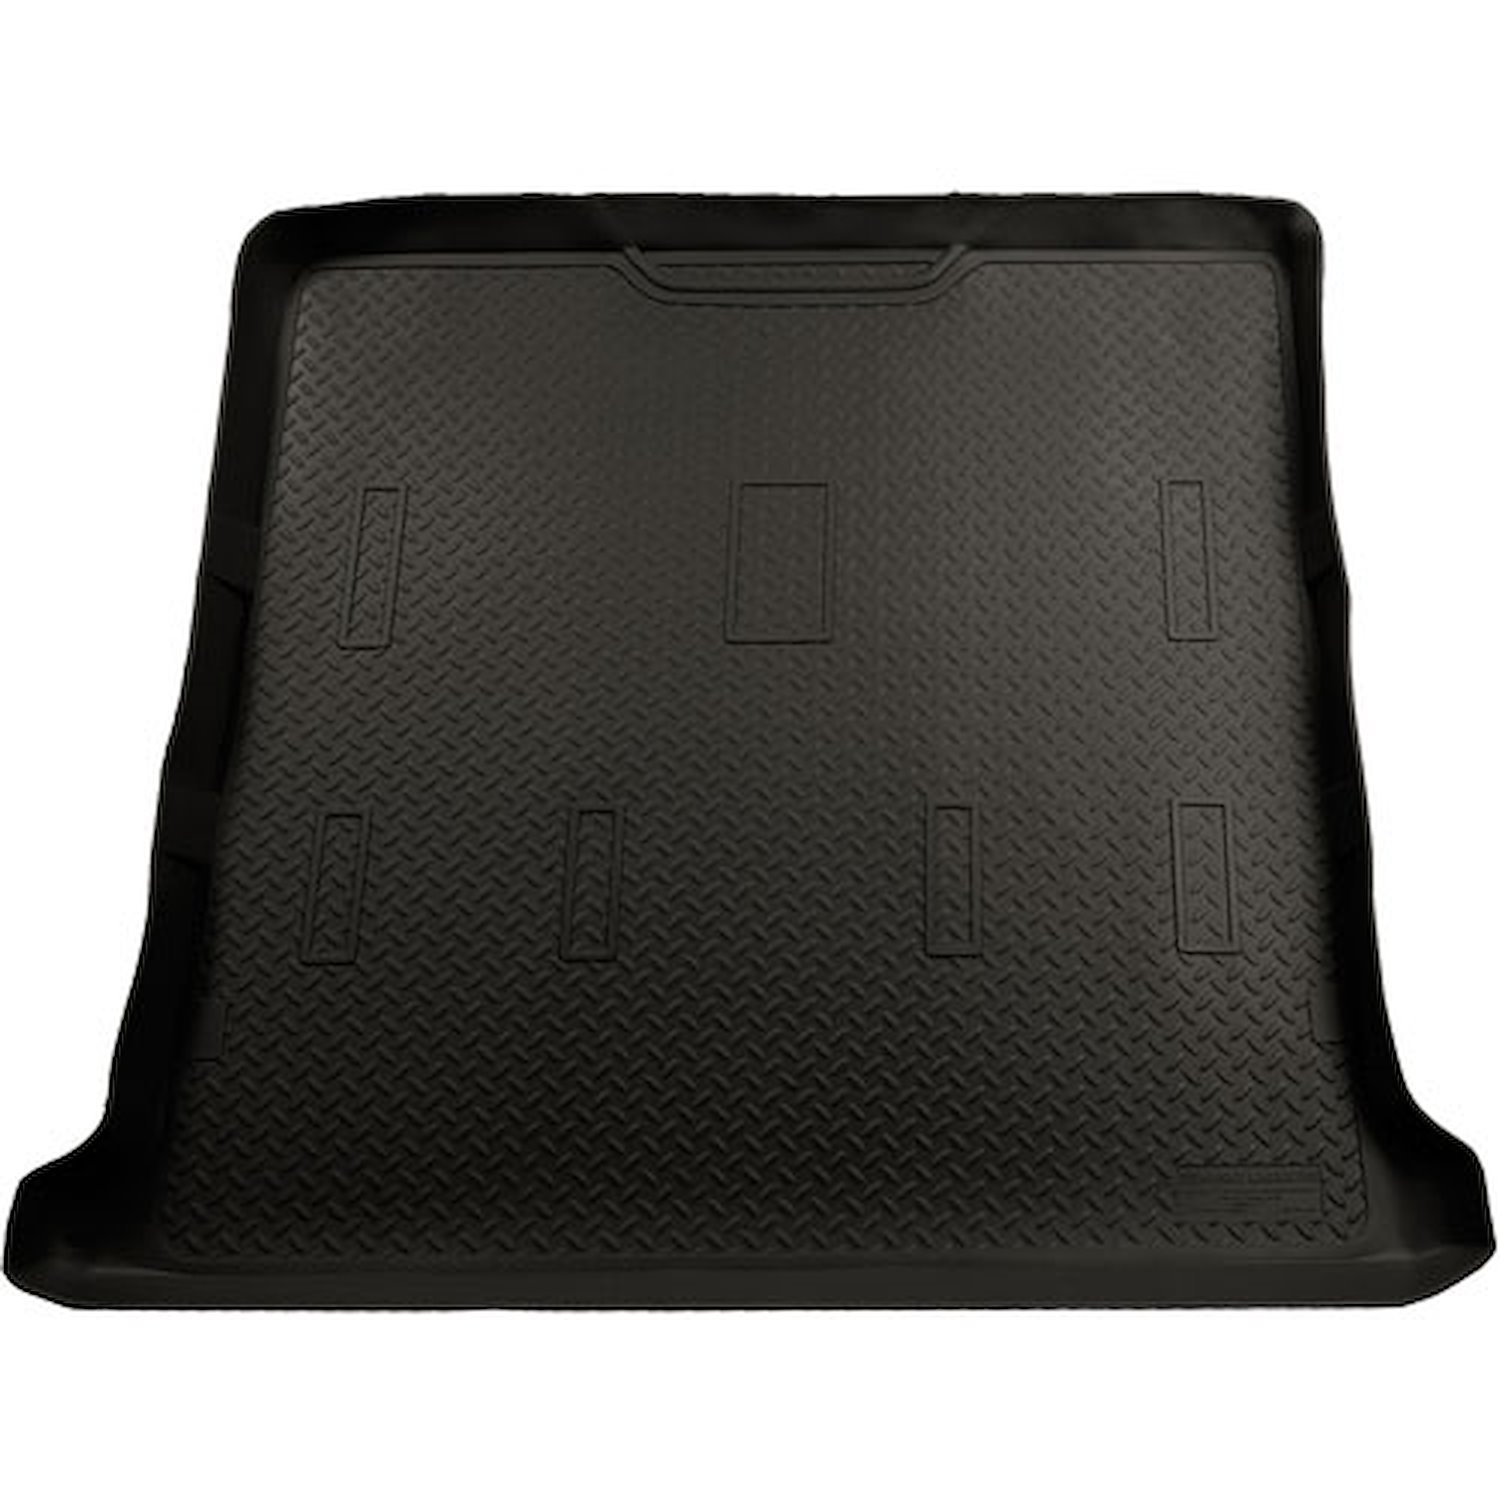 Classic Style Cargo Area Liner 2000-2006 Chevy Tahoe/GMC